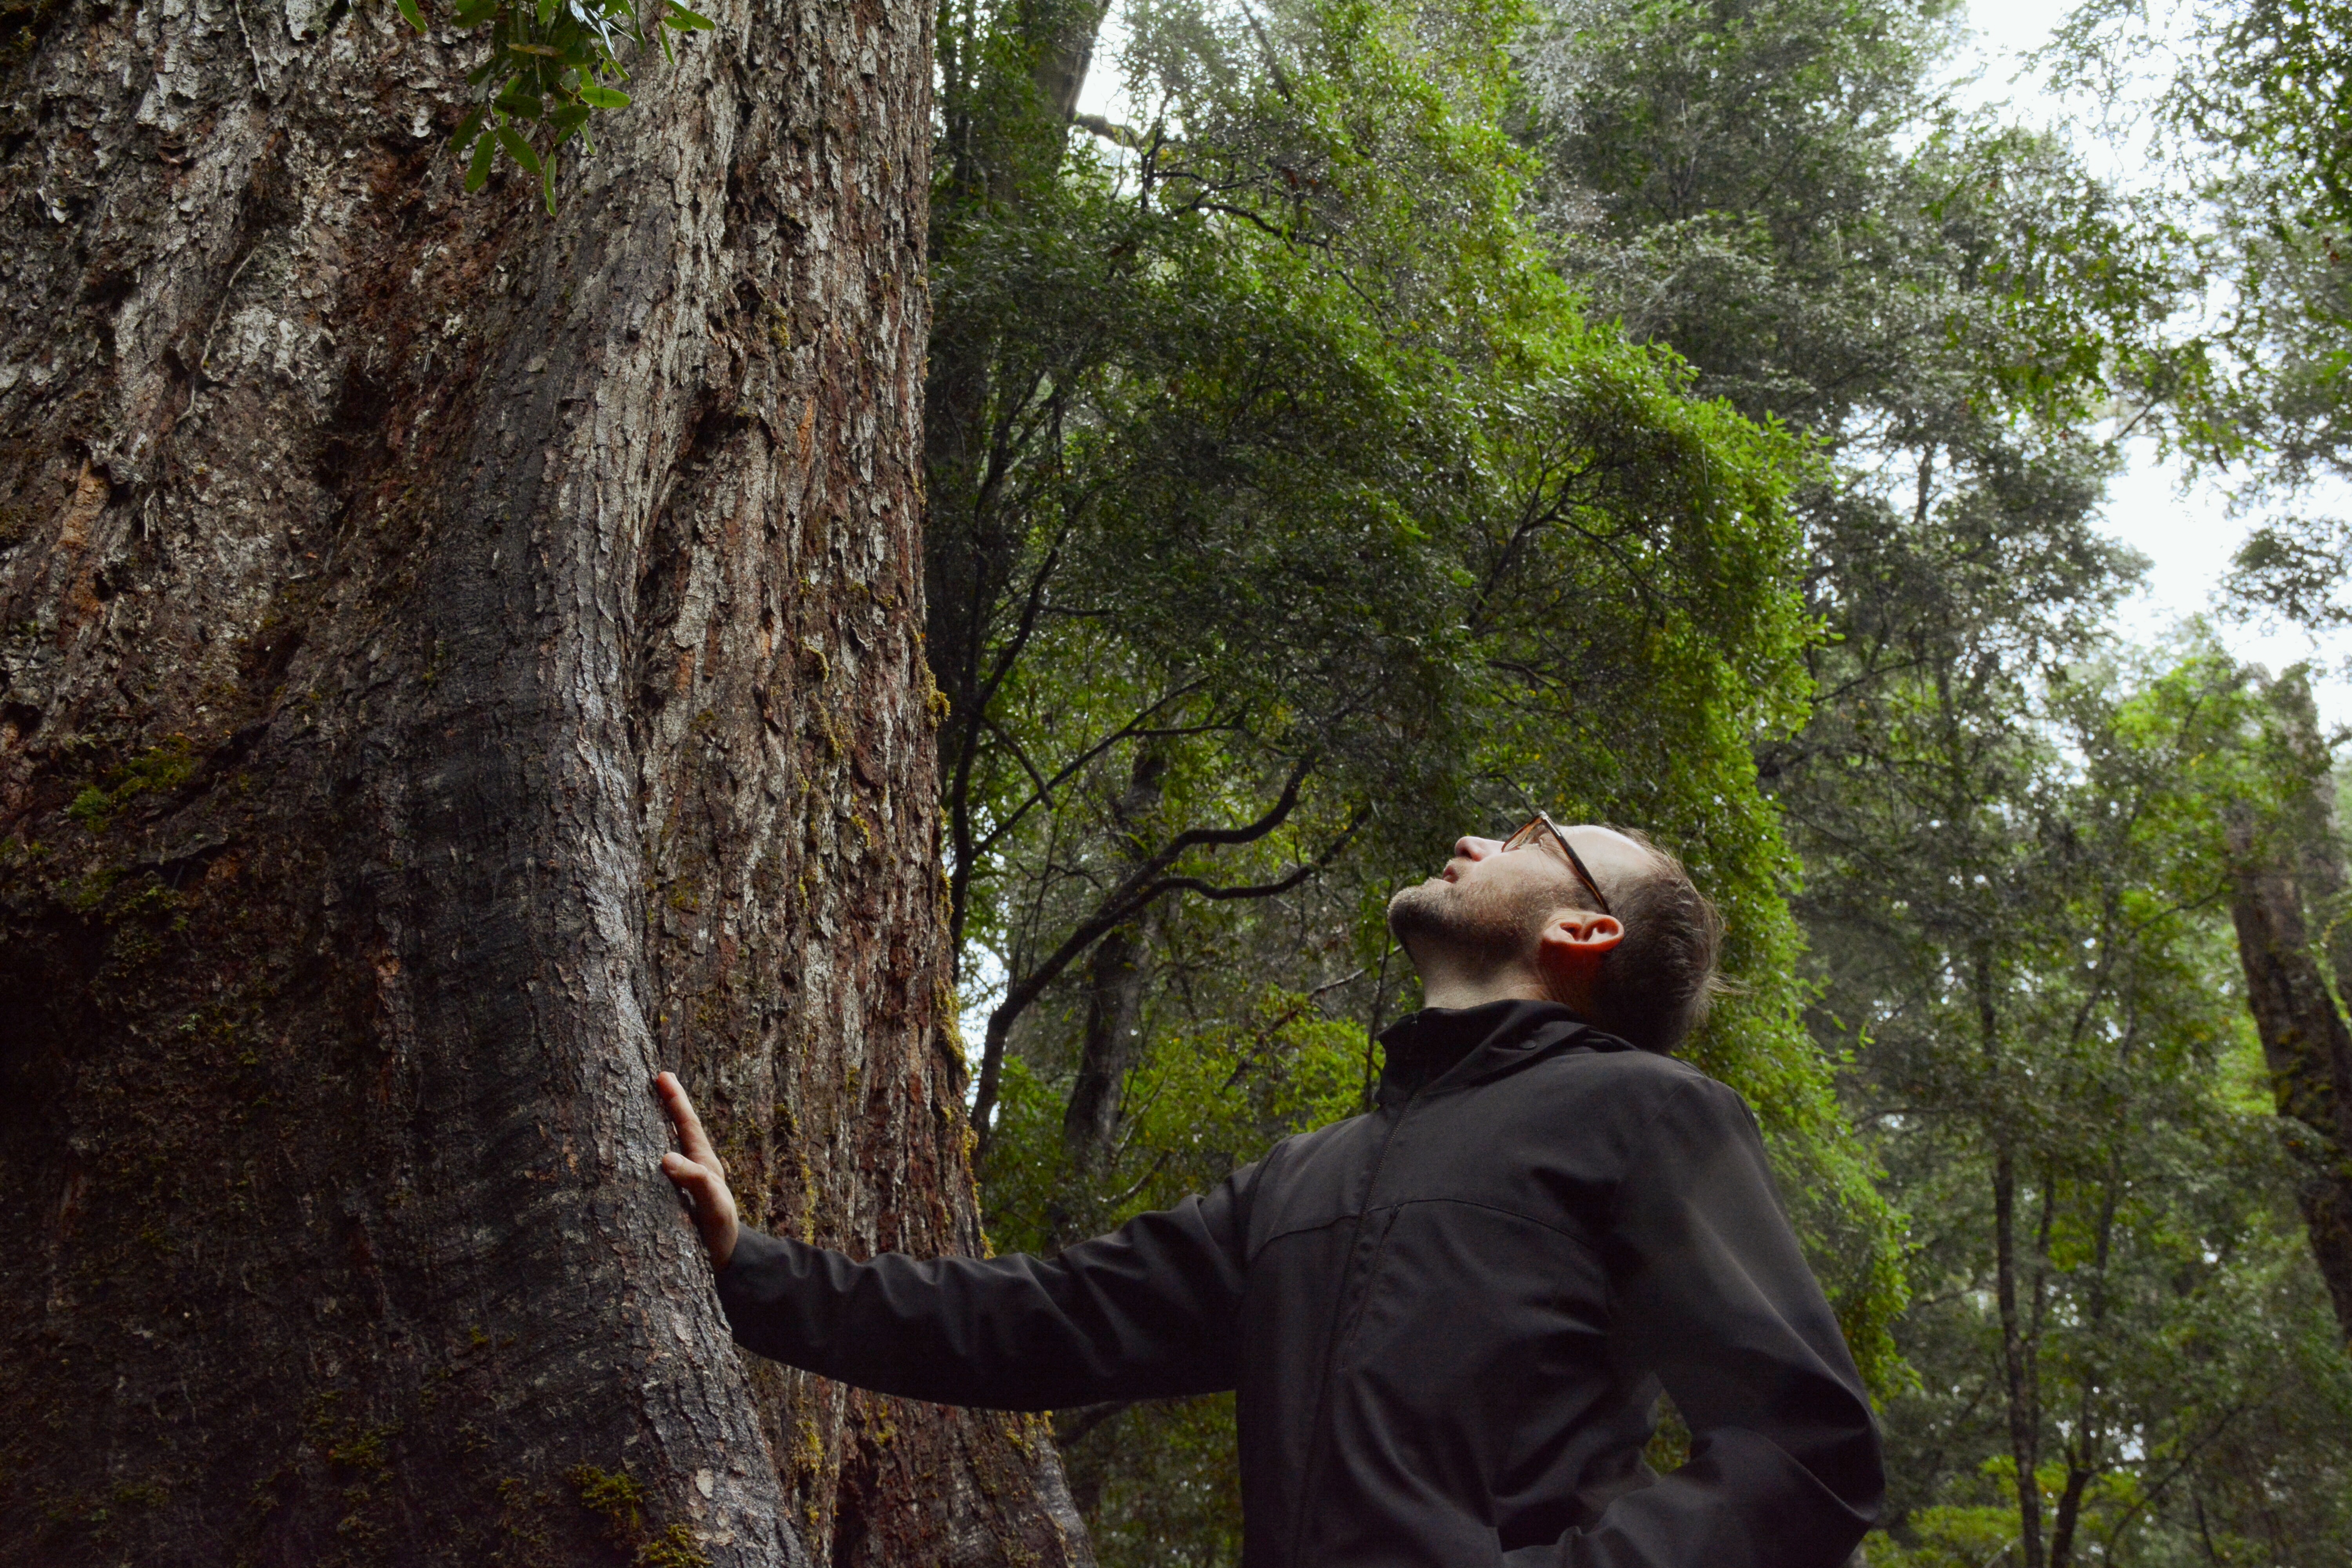 Offsets story hero images - Adam Bandt in the forest looking up at a large tree